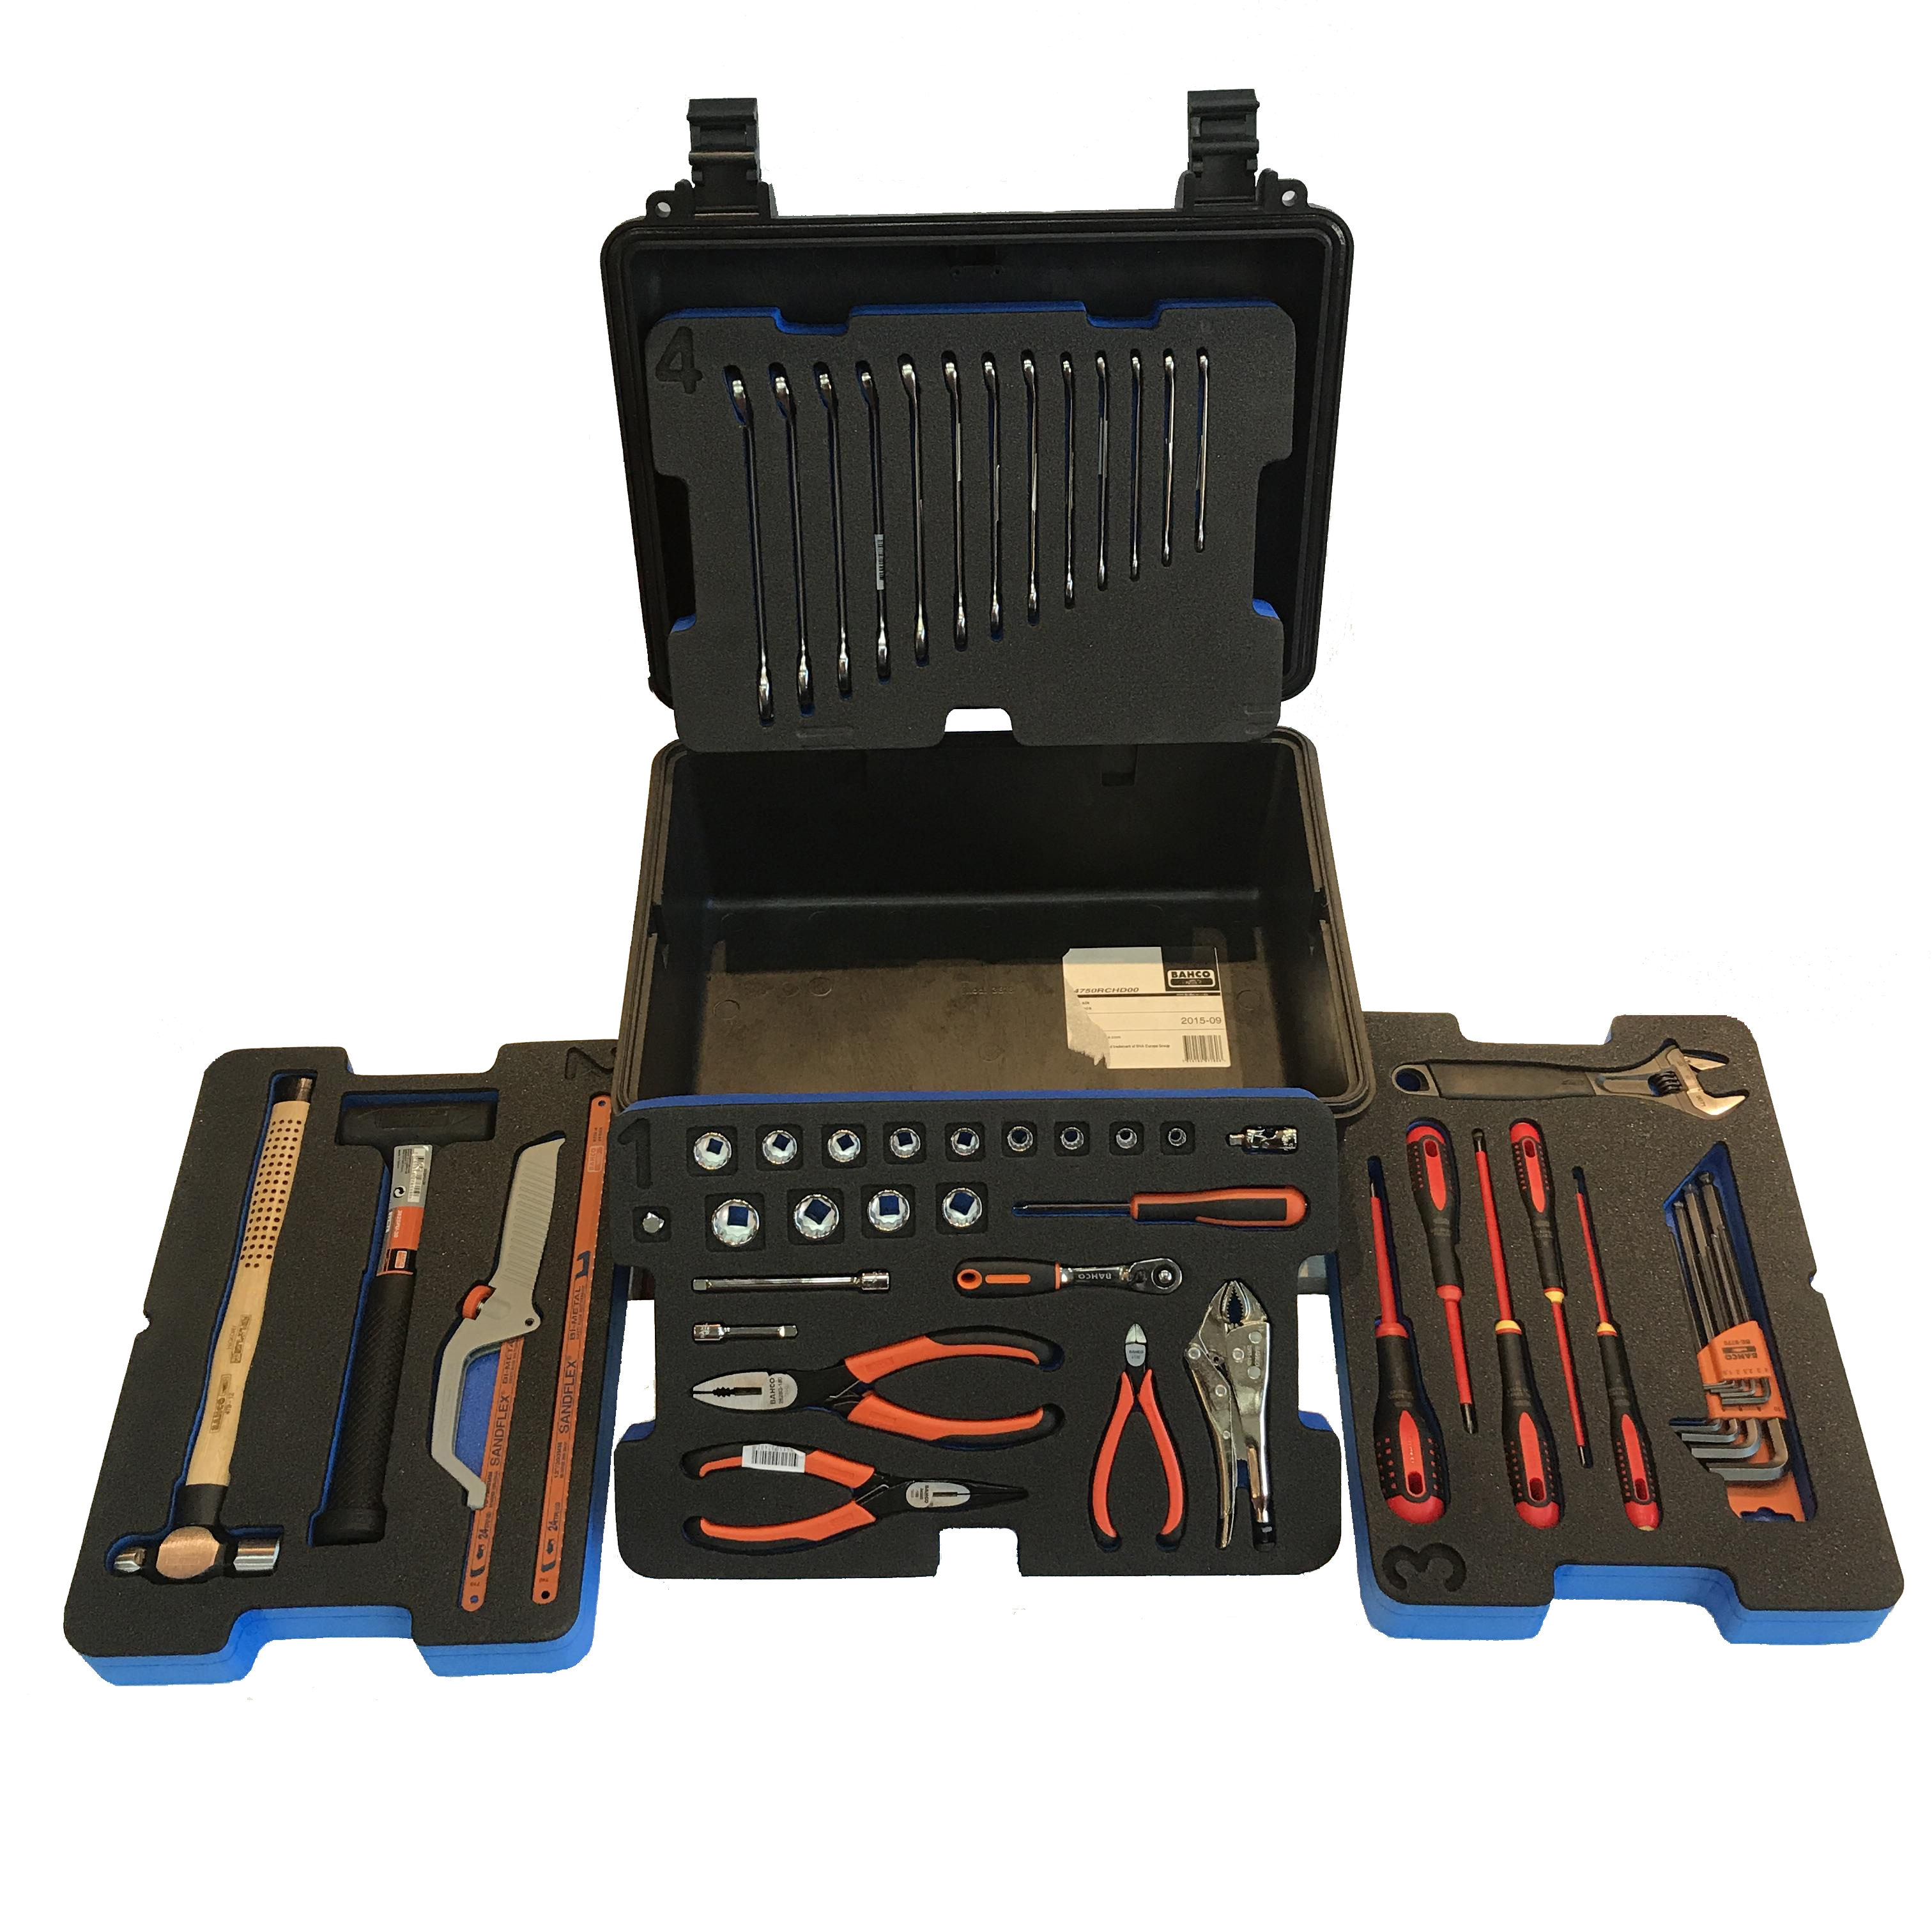 Custom tools solution for maintenance of boats in the marine industry - Red  Box Tools & Foams